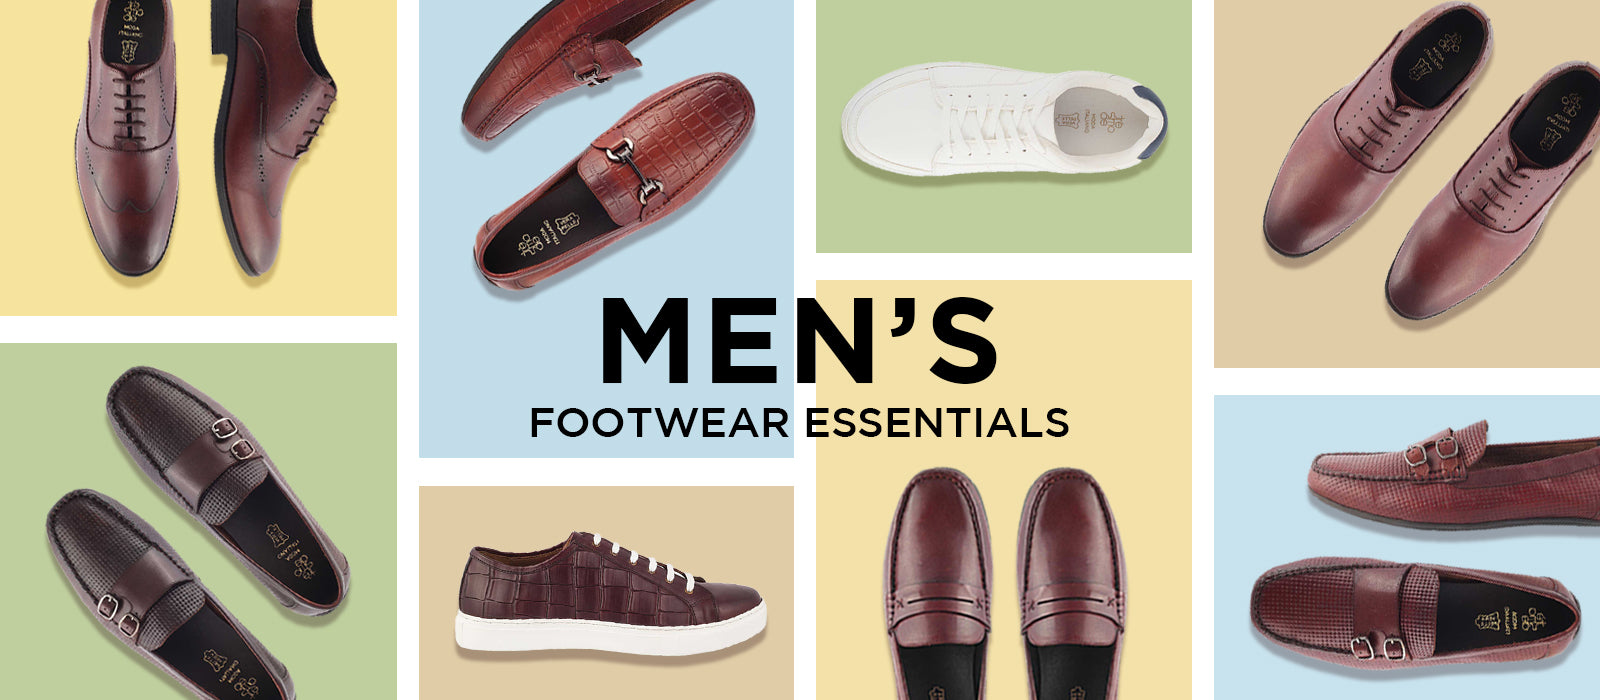 Find Your Perfect Pair: Types of Shoes for Every Occasion